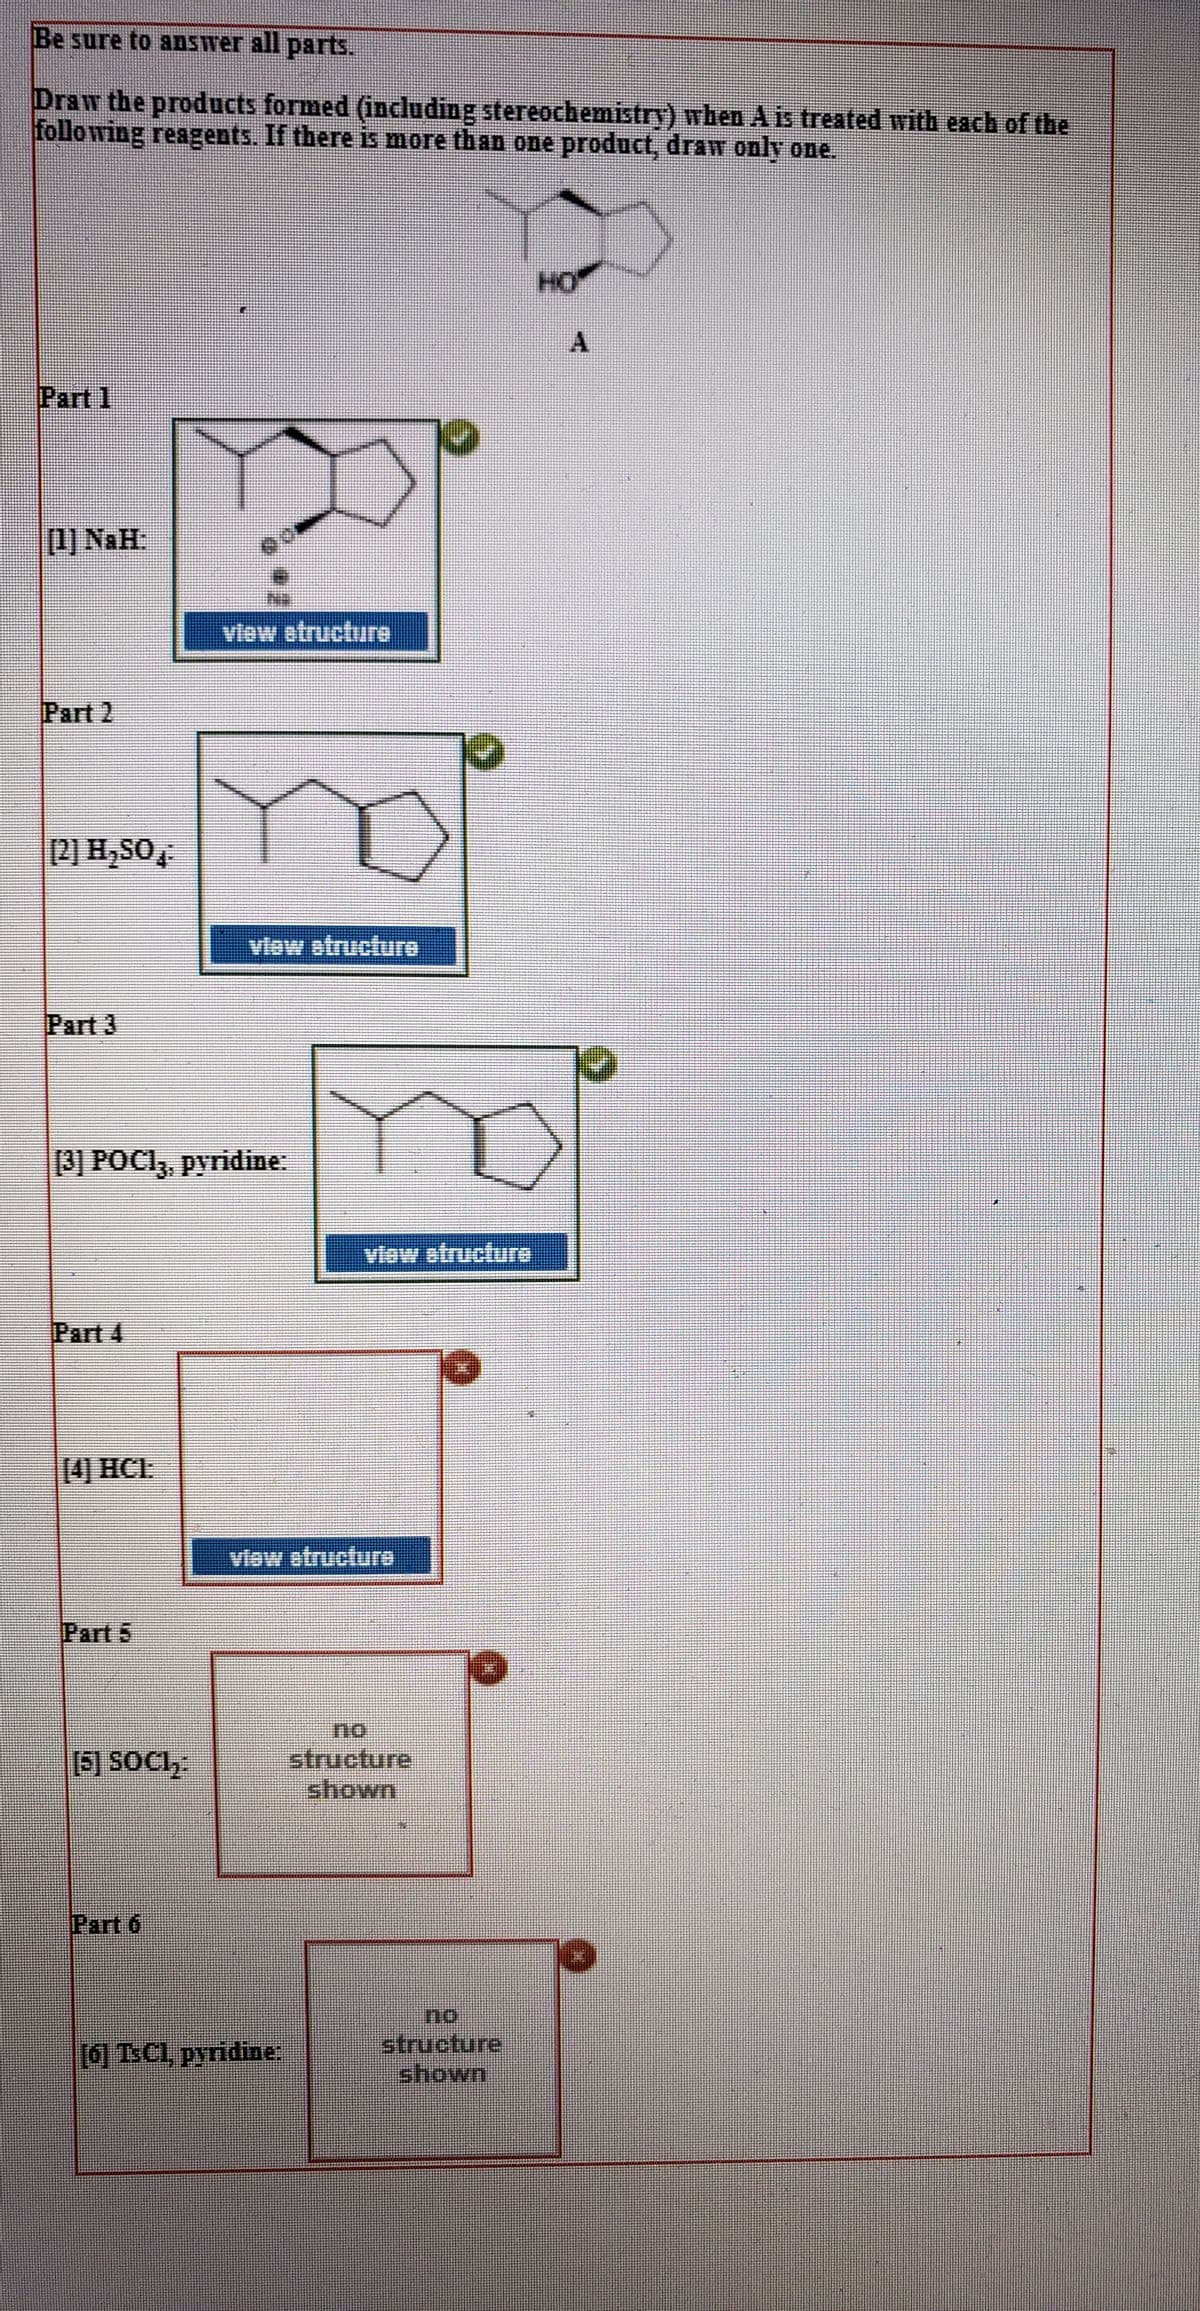 Be sure to aDswer all parts.
Draw the products formed (including stereochemistry) wben A is treated with each of the
following reagents. If there is more than one product, draw only one.
HO
Part 1
[1) NaH:
view etructure
Part 2
2) H,SO
view atructure
Part 3
3) POC1,, pyridine:
view atructure
Part 4
[4 HCL
vlew etructure
Part 5
no.
structure
shown
(S] SOGI,
Part 6
[6] TSC1, pyridine:
structure
shown
